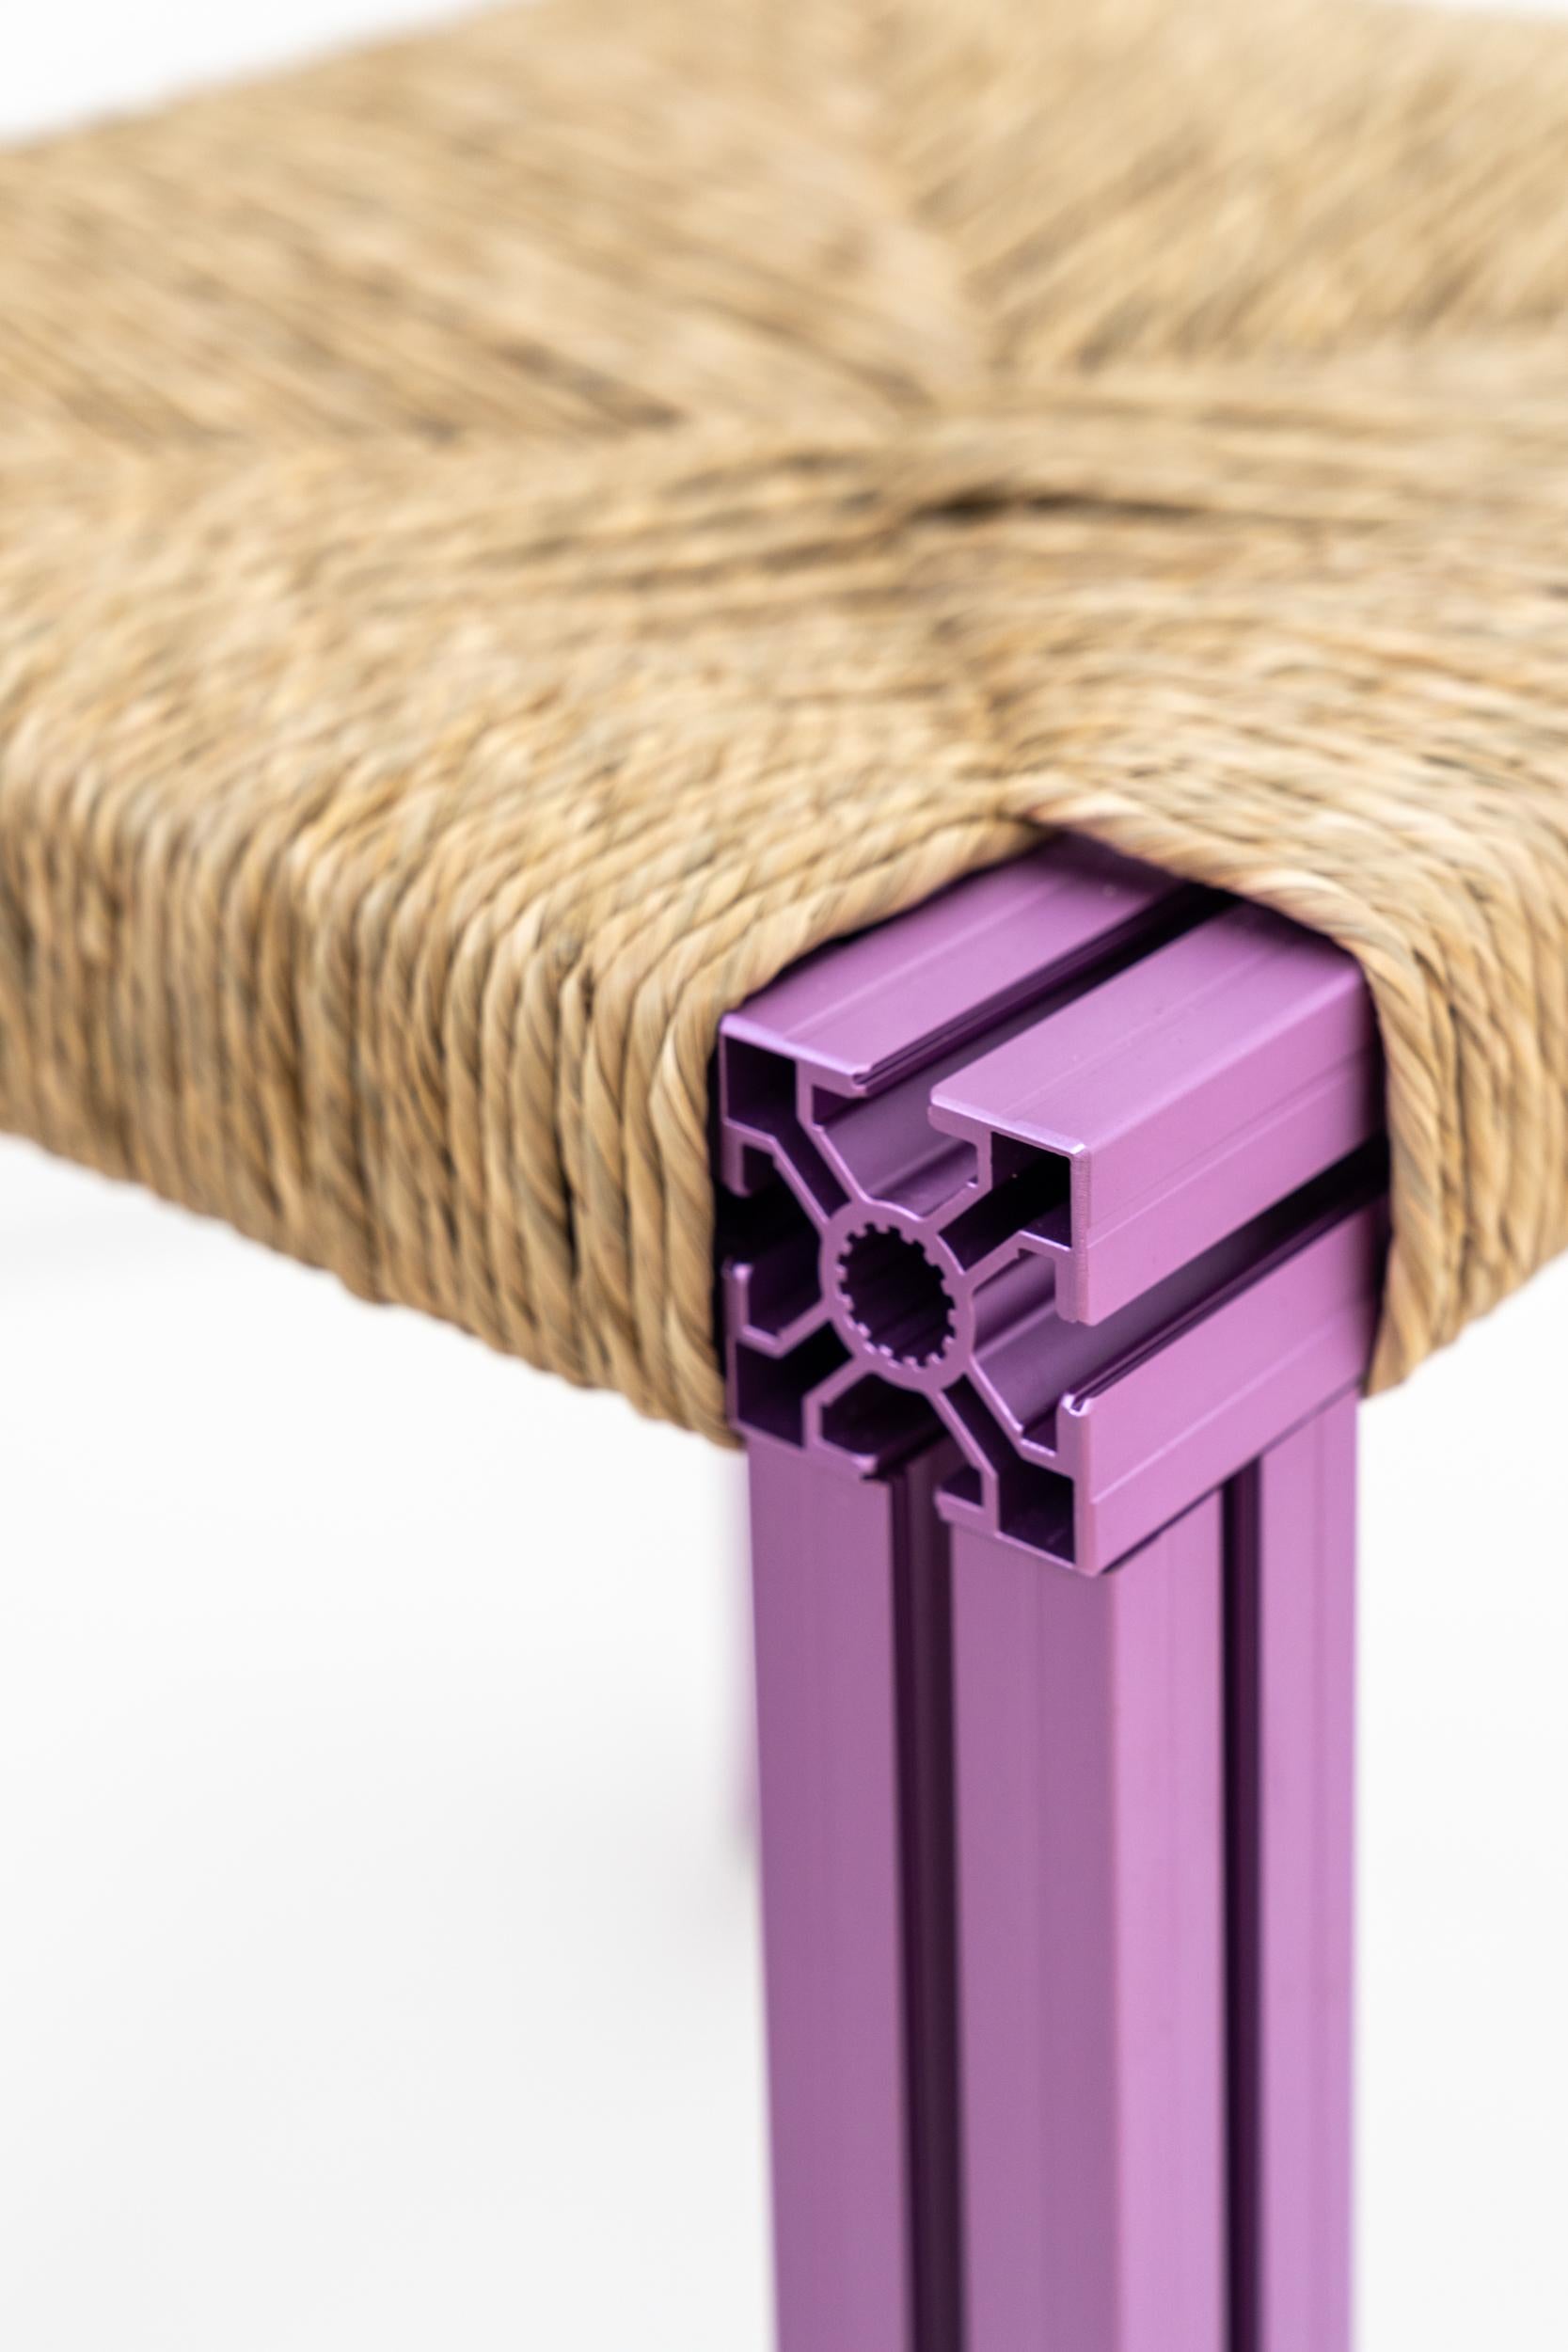 Anodized Purple and Rush Weave Wicker Stool by Tino Seubert In New Condition For Sale In Geneve, CH